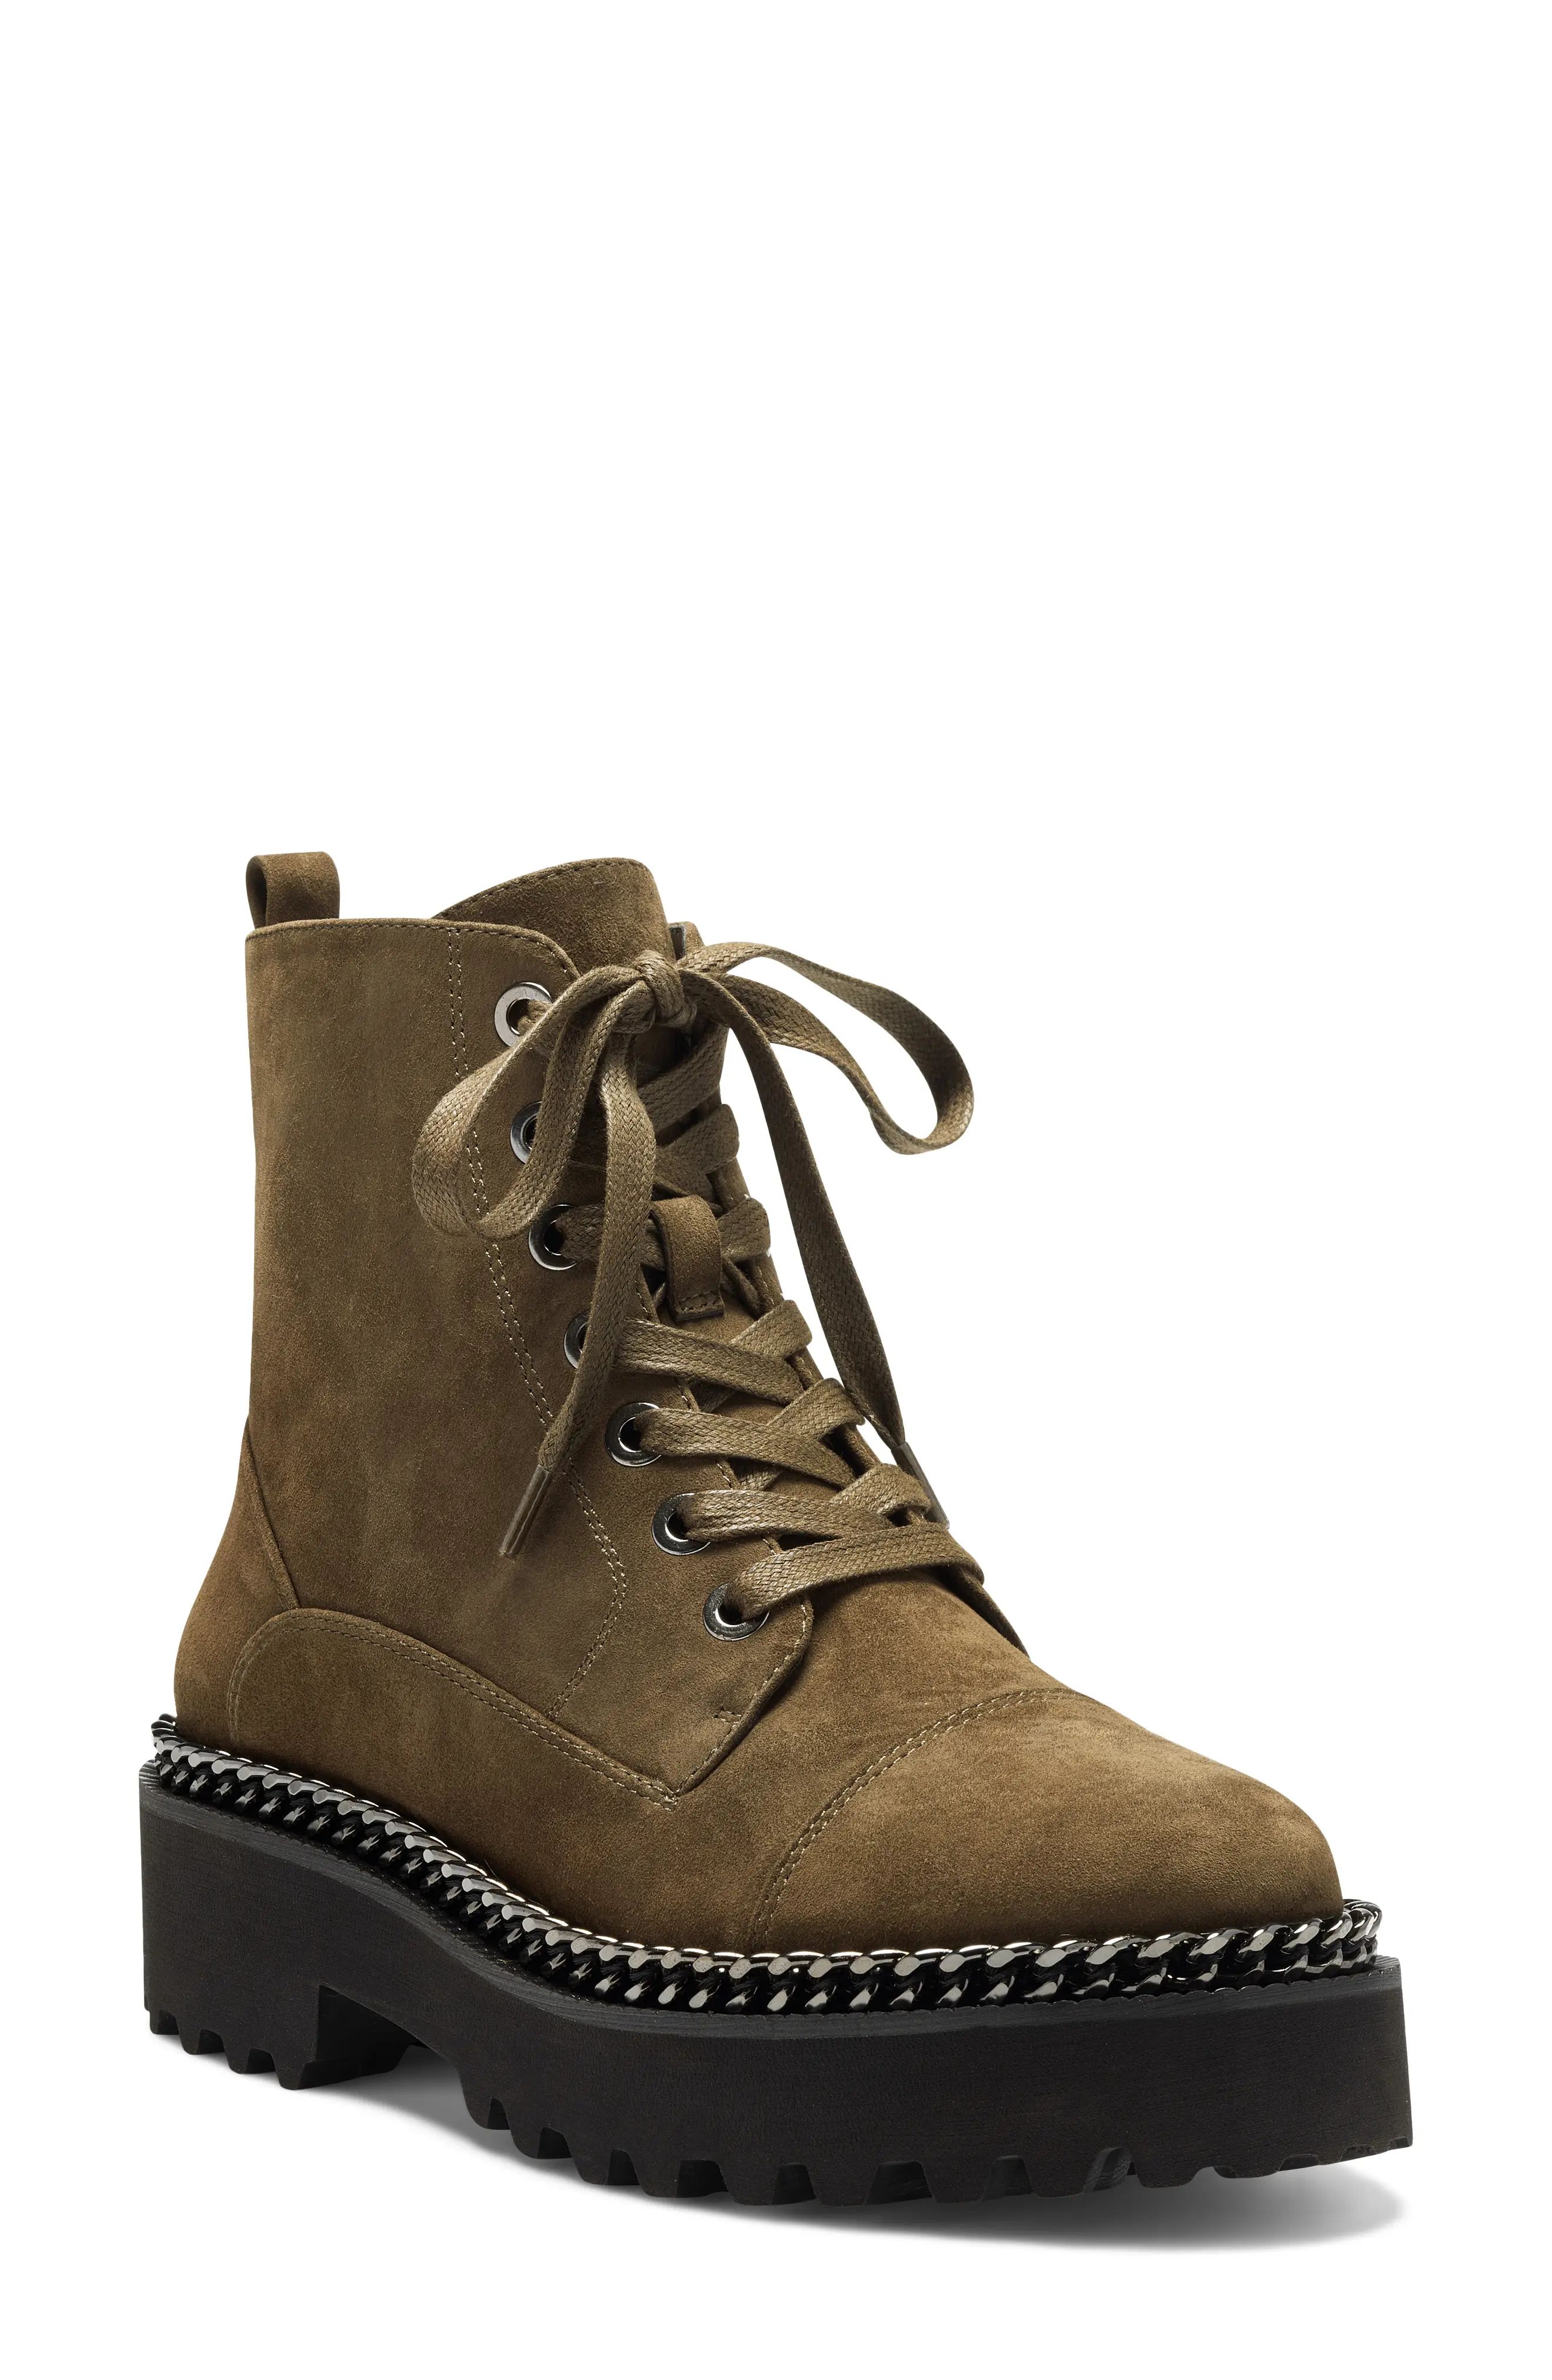 Women's Vince Camuto Mindinta Chain Trim Combat Boot, Size 6.5 M - Green | Nordstrom